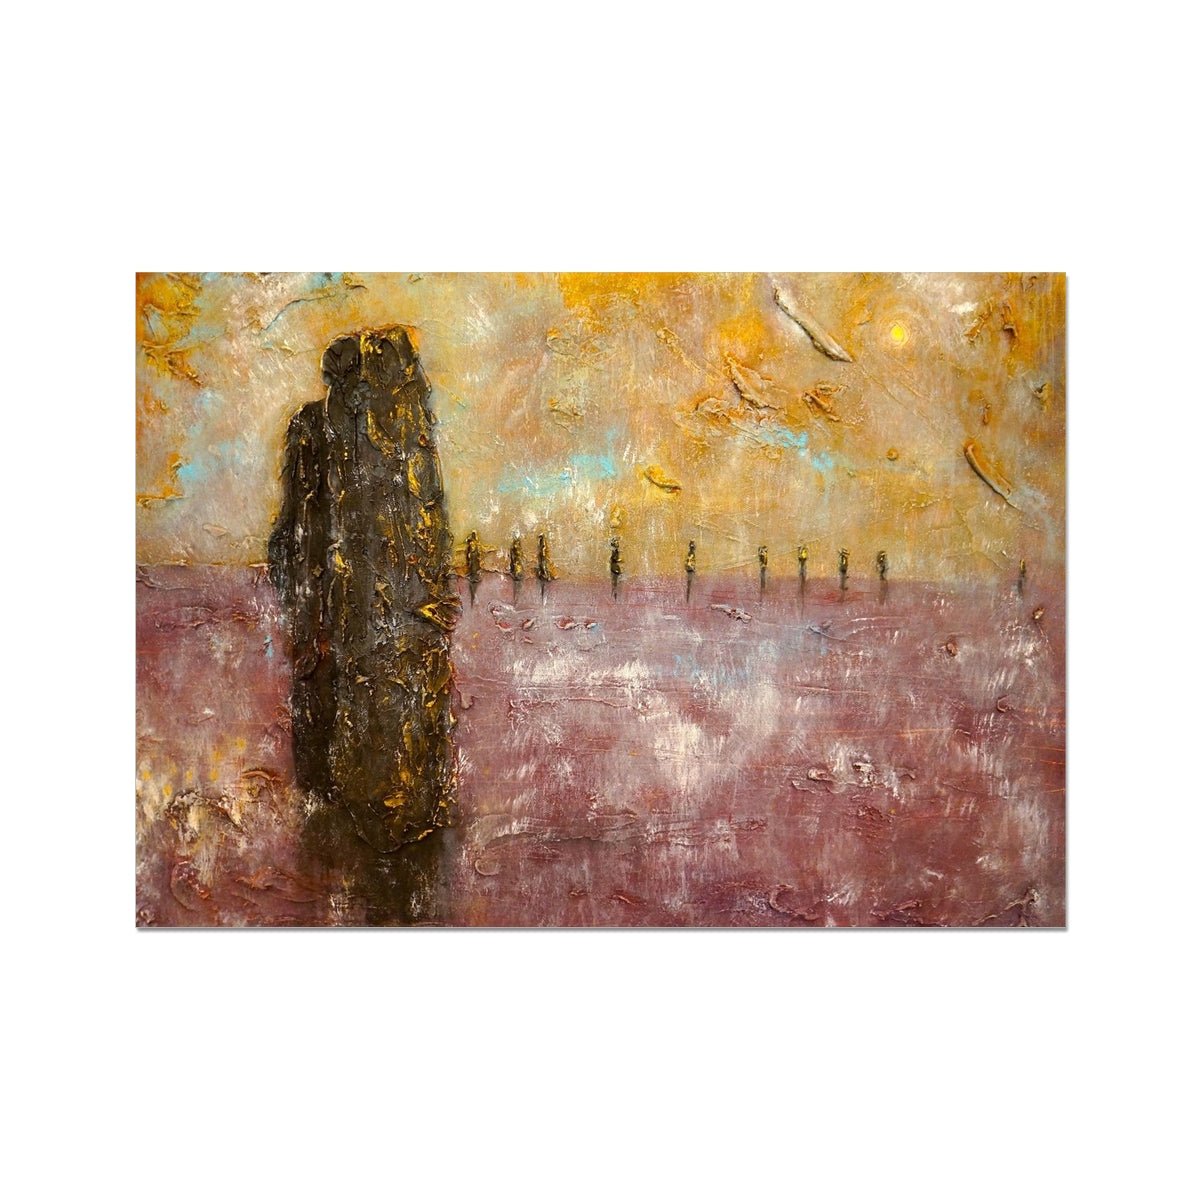 Brodgar Mist Orkney Painting | Fine Art Prints From Scotland-Unframed Prints-Orkney Art Gallery-A2 Landscape-Paintings, Prints, Homeware, Art Gifts From Scotland By Scottish Artist Kevin Hunter